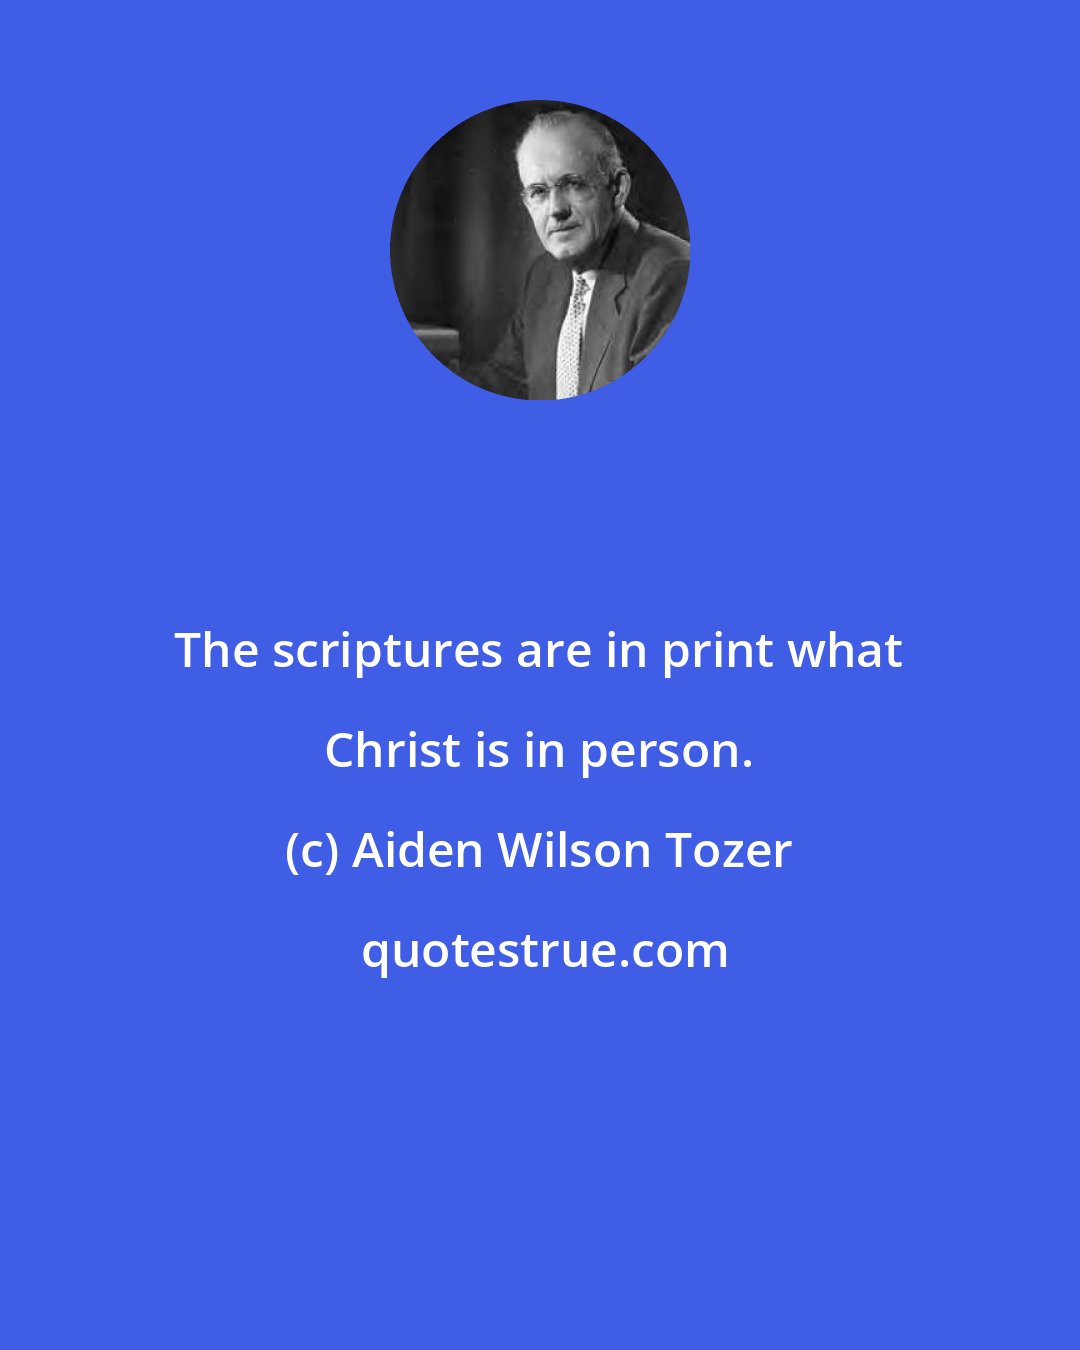 Aiden Wilson Tozer: The scriptures are in print what Christ is in person.